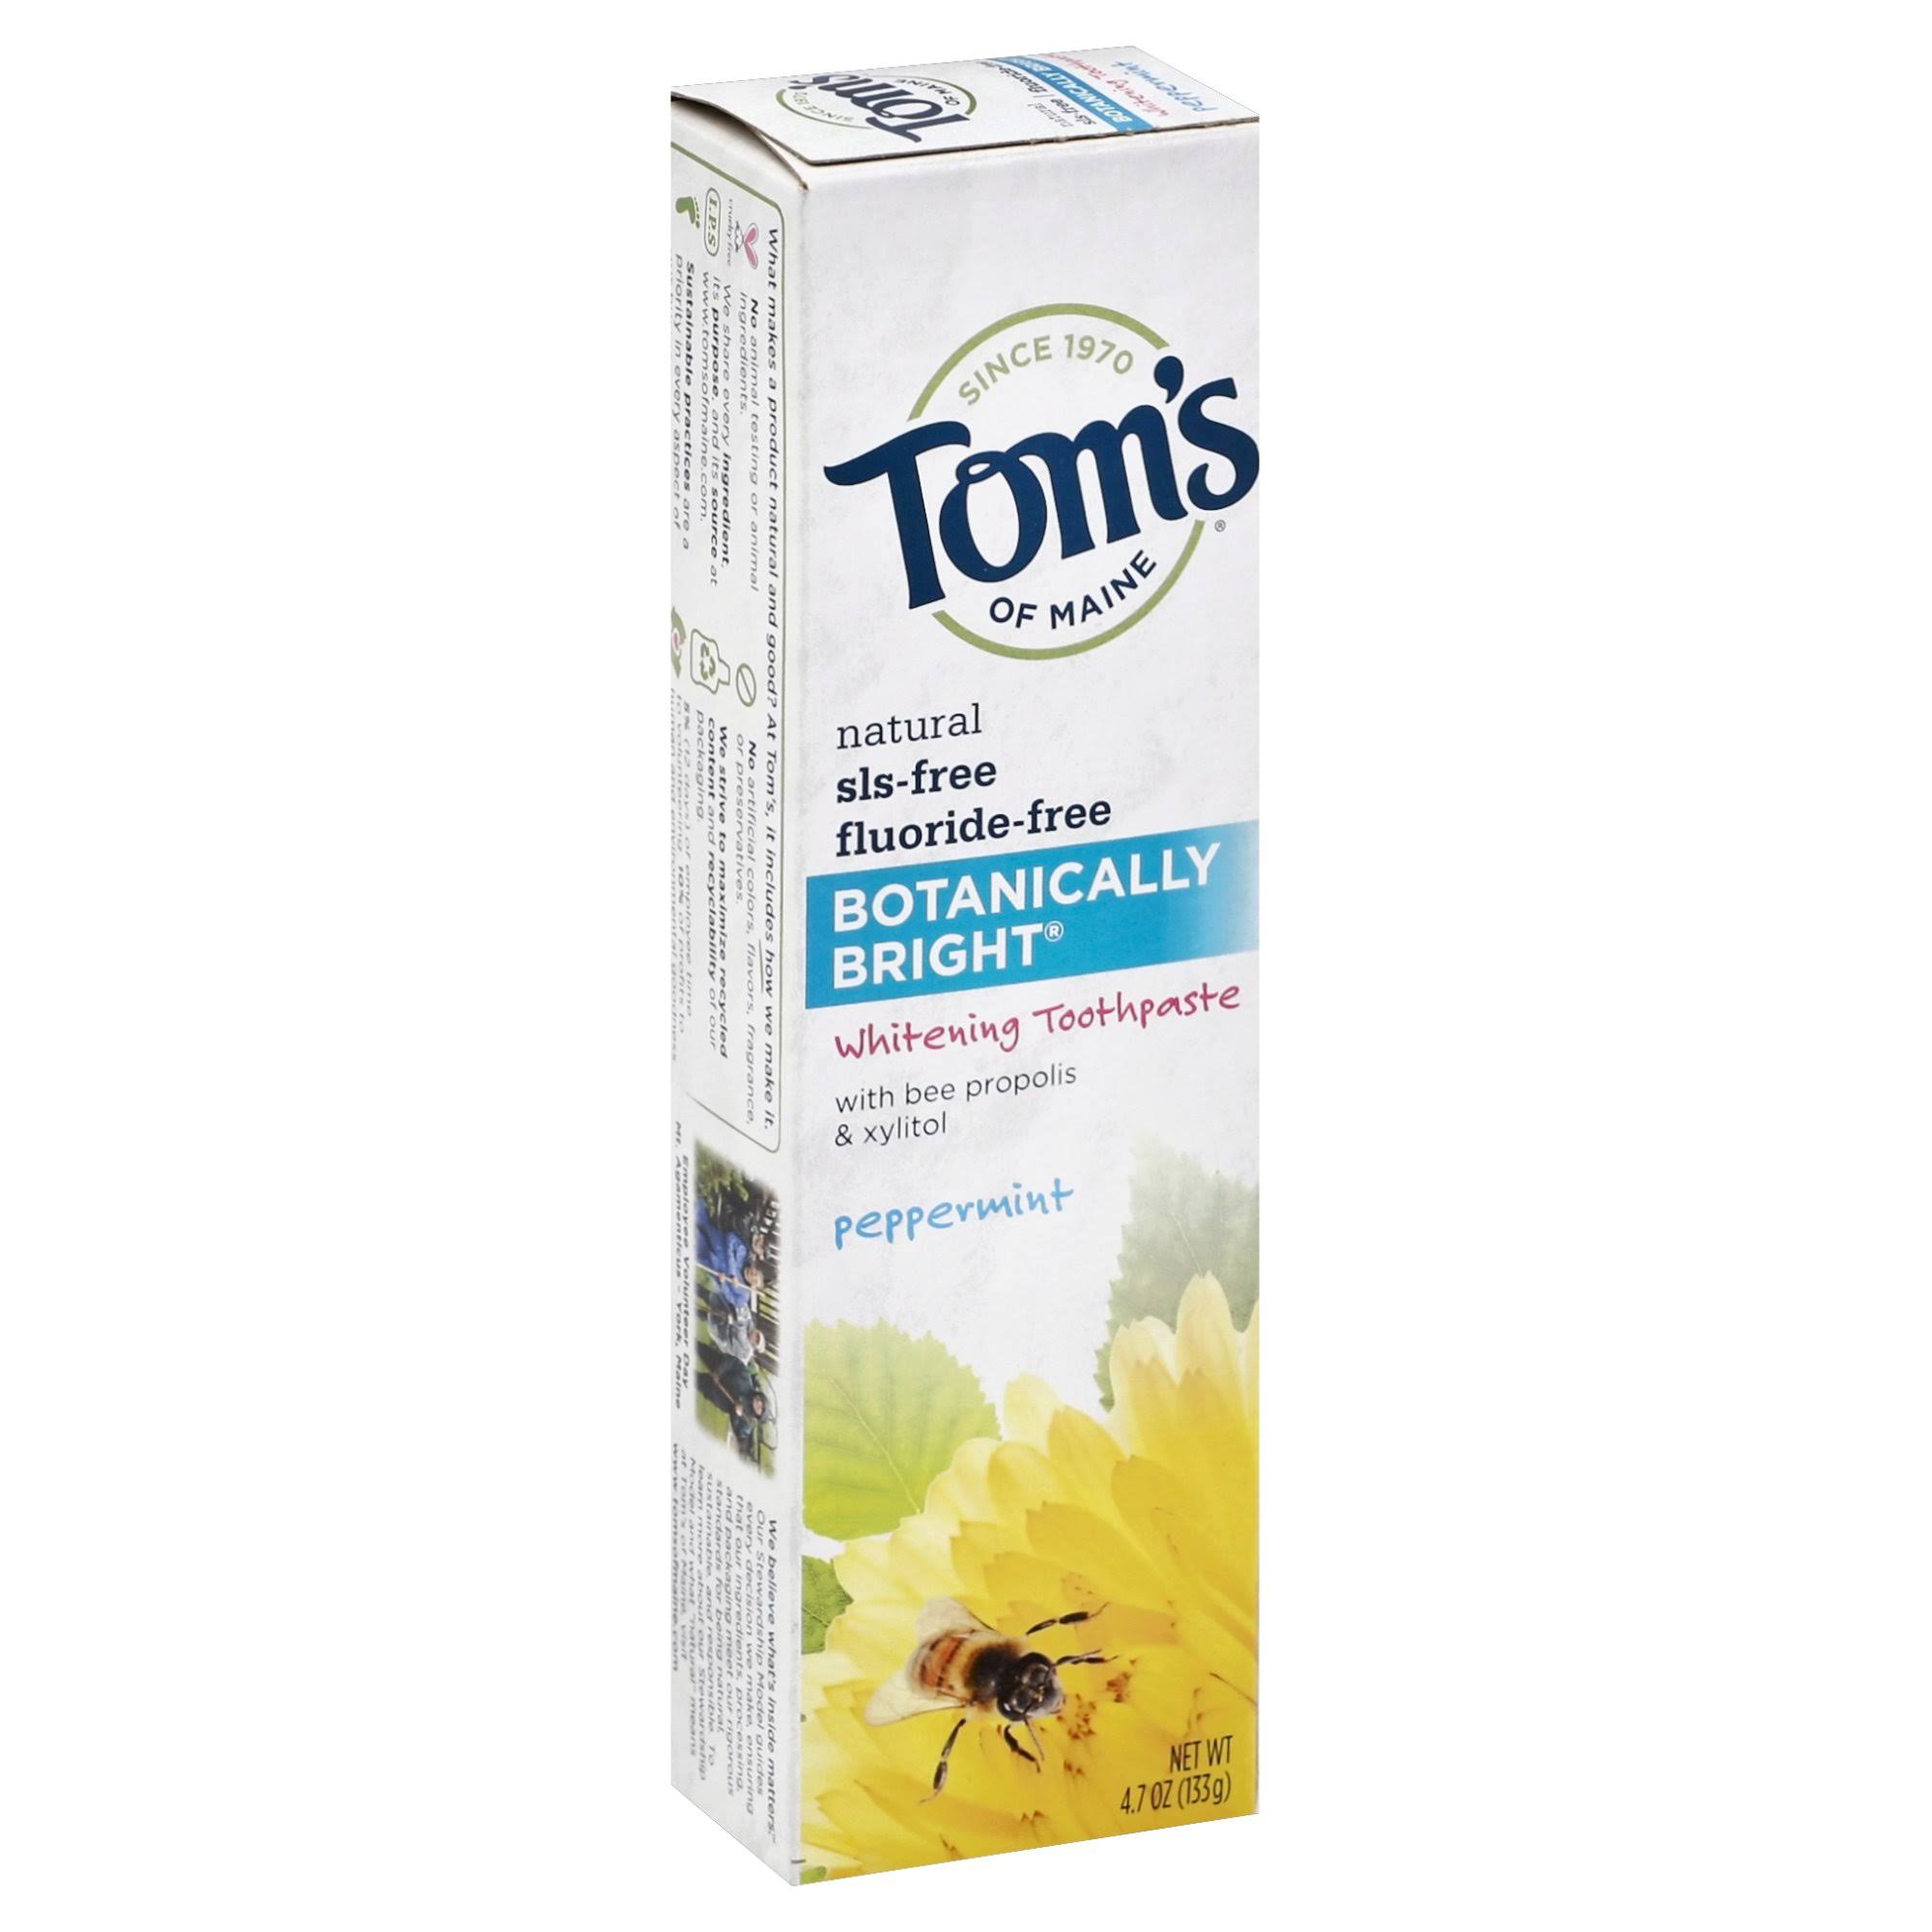 Toms of Main Botanically Bright Whitening Toothpaste - Peppermint, 4.7oz